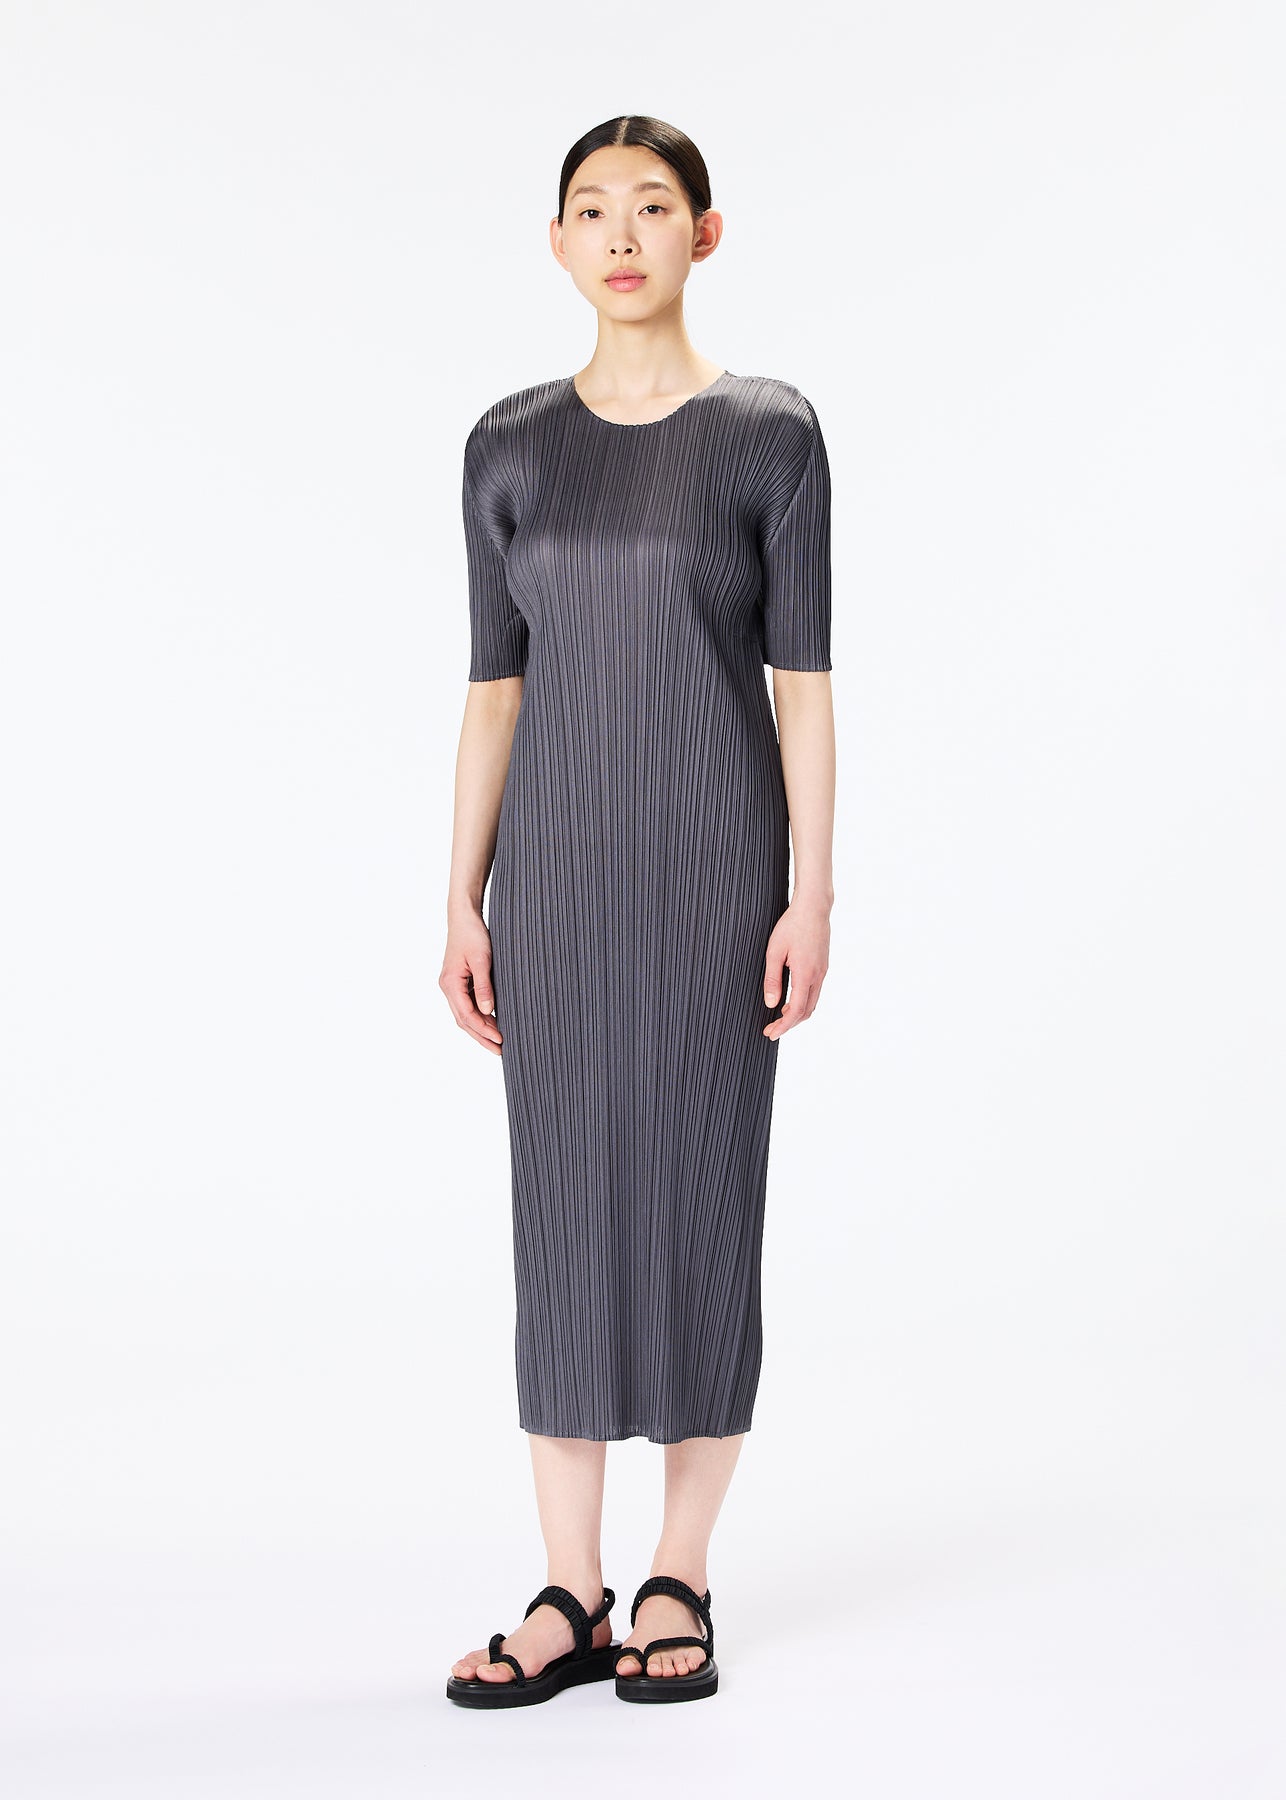 May Monthly Colors Dress in Dark Gray by Pleats Please Issey Miyake